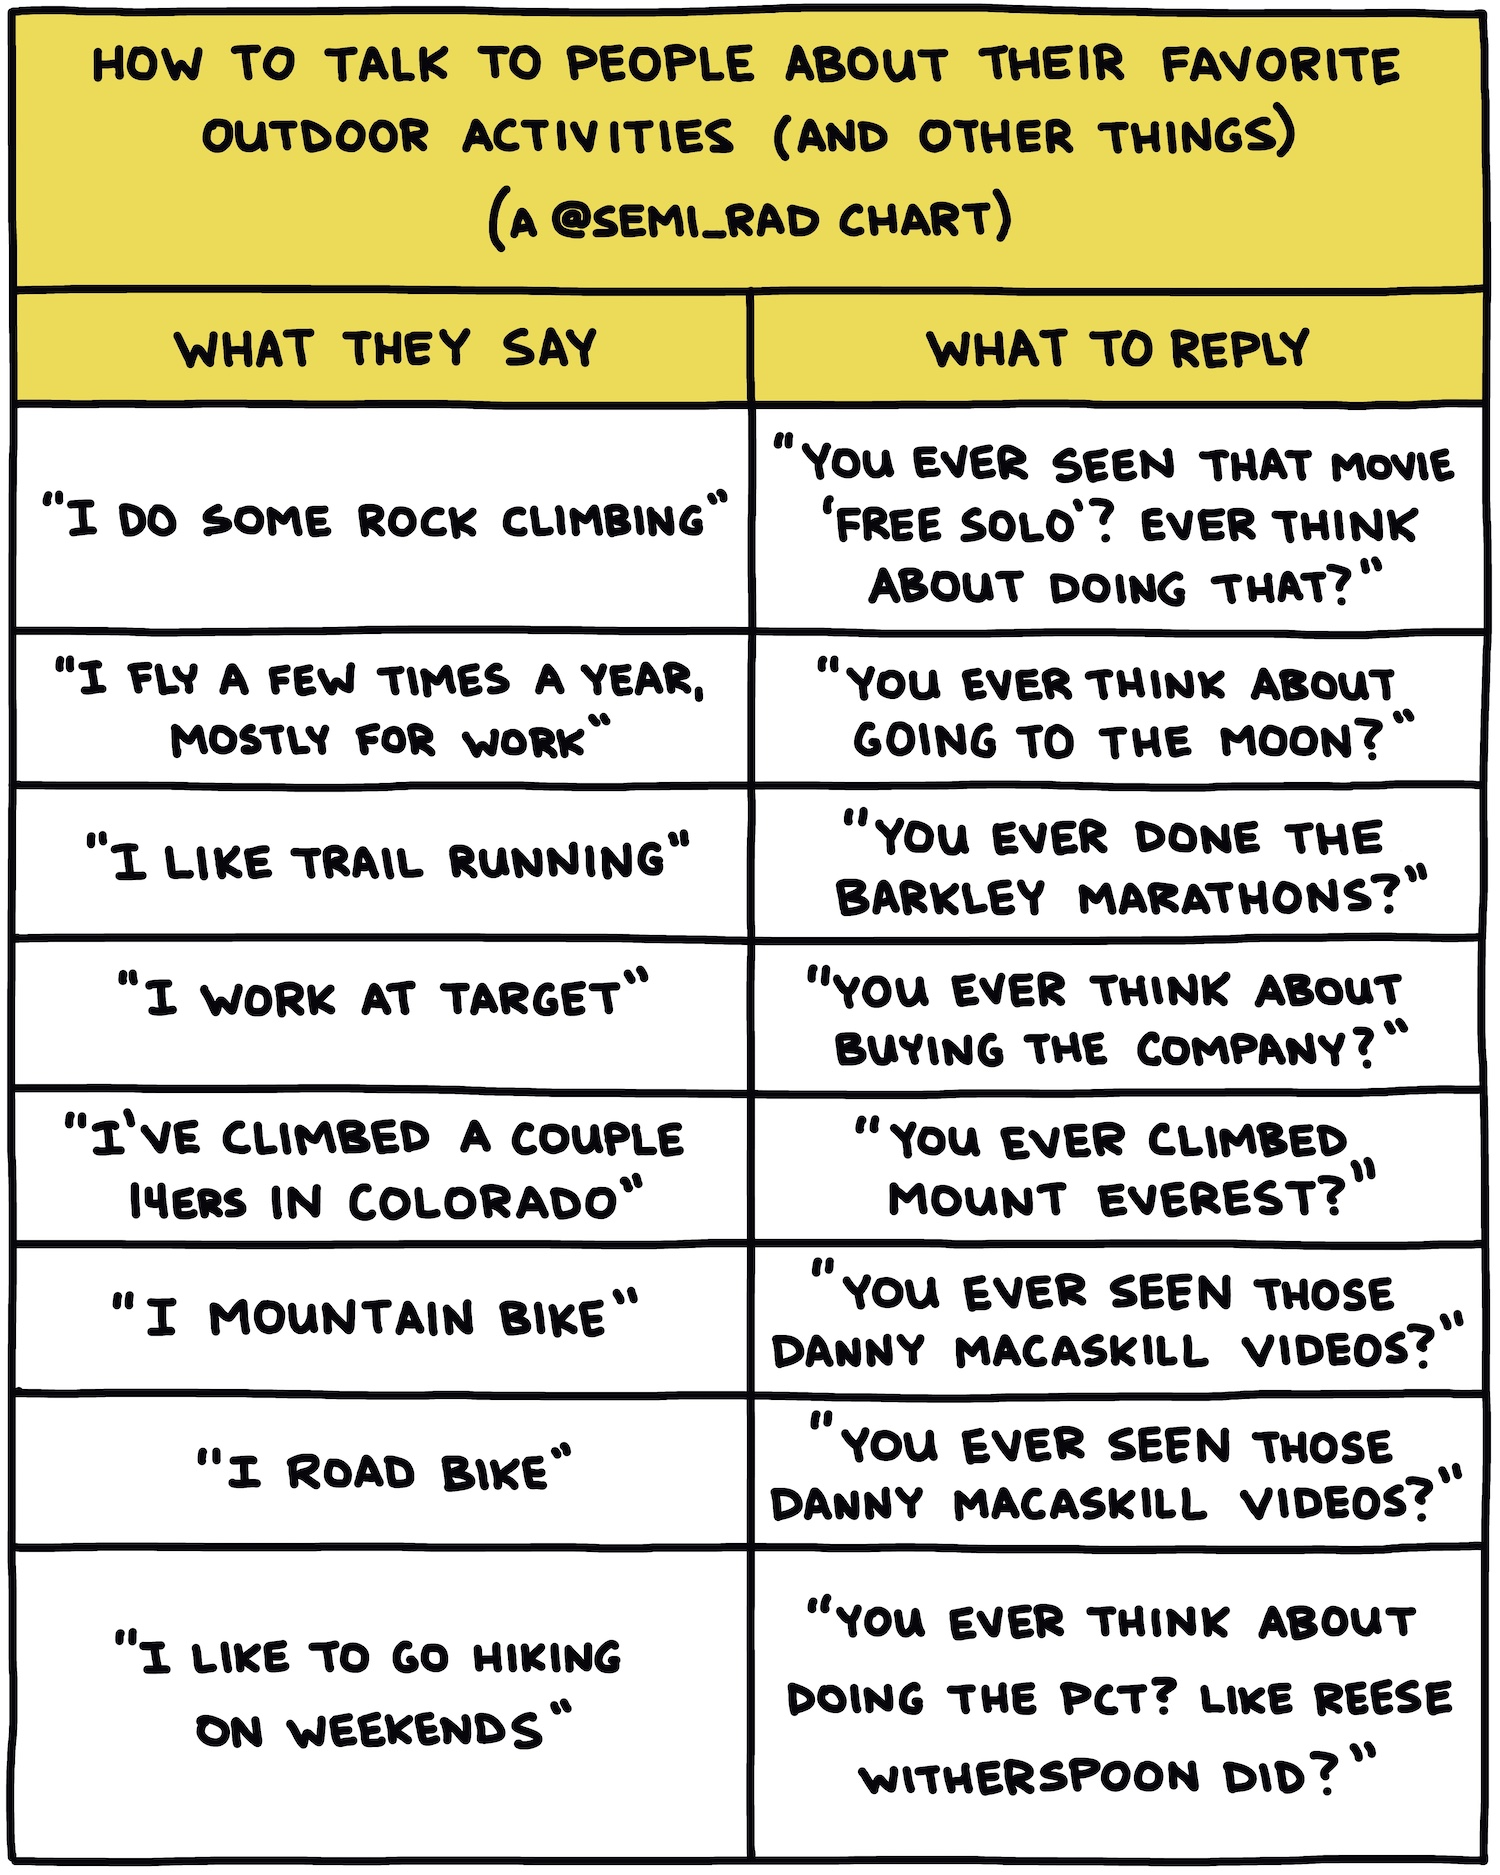 semi-rad chart: how to talk to people about their favorite outdoor activities part 1